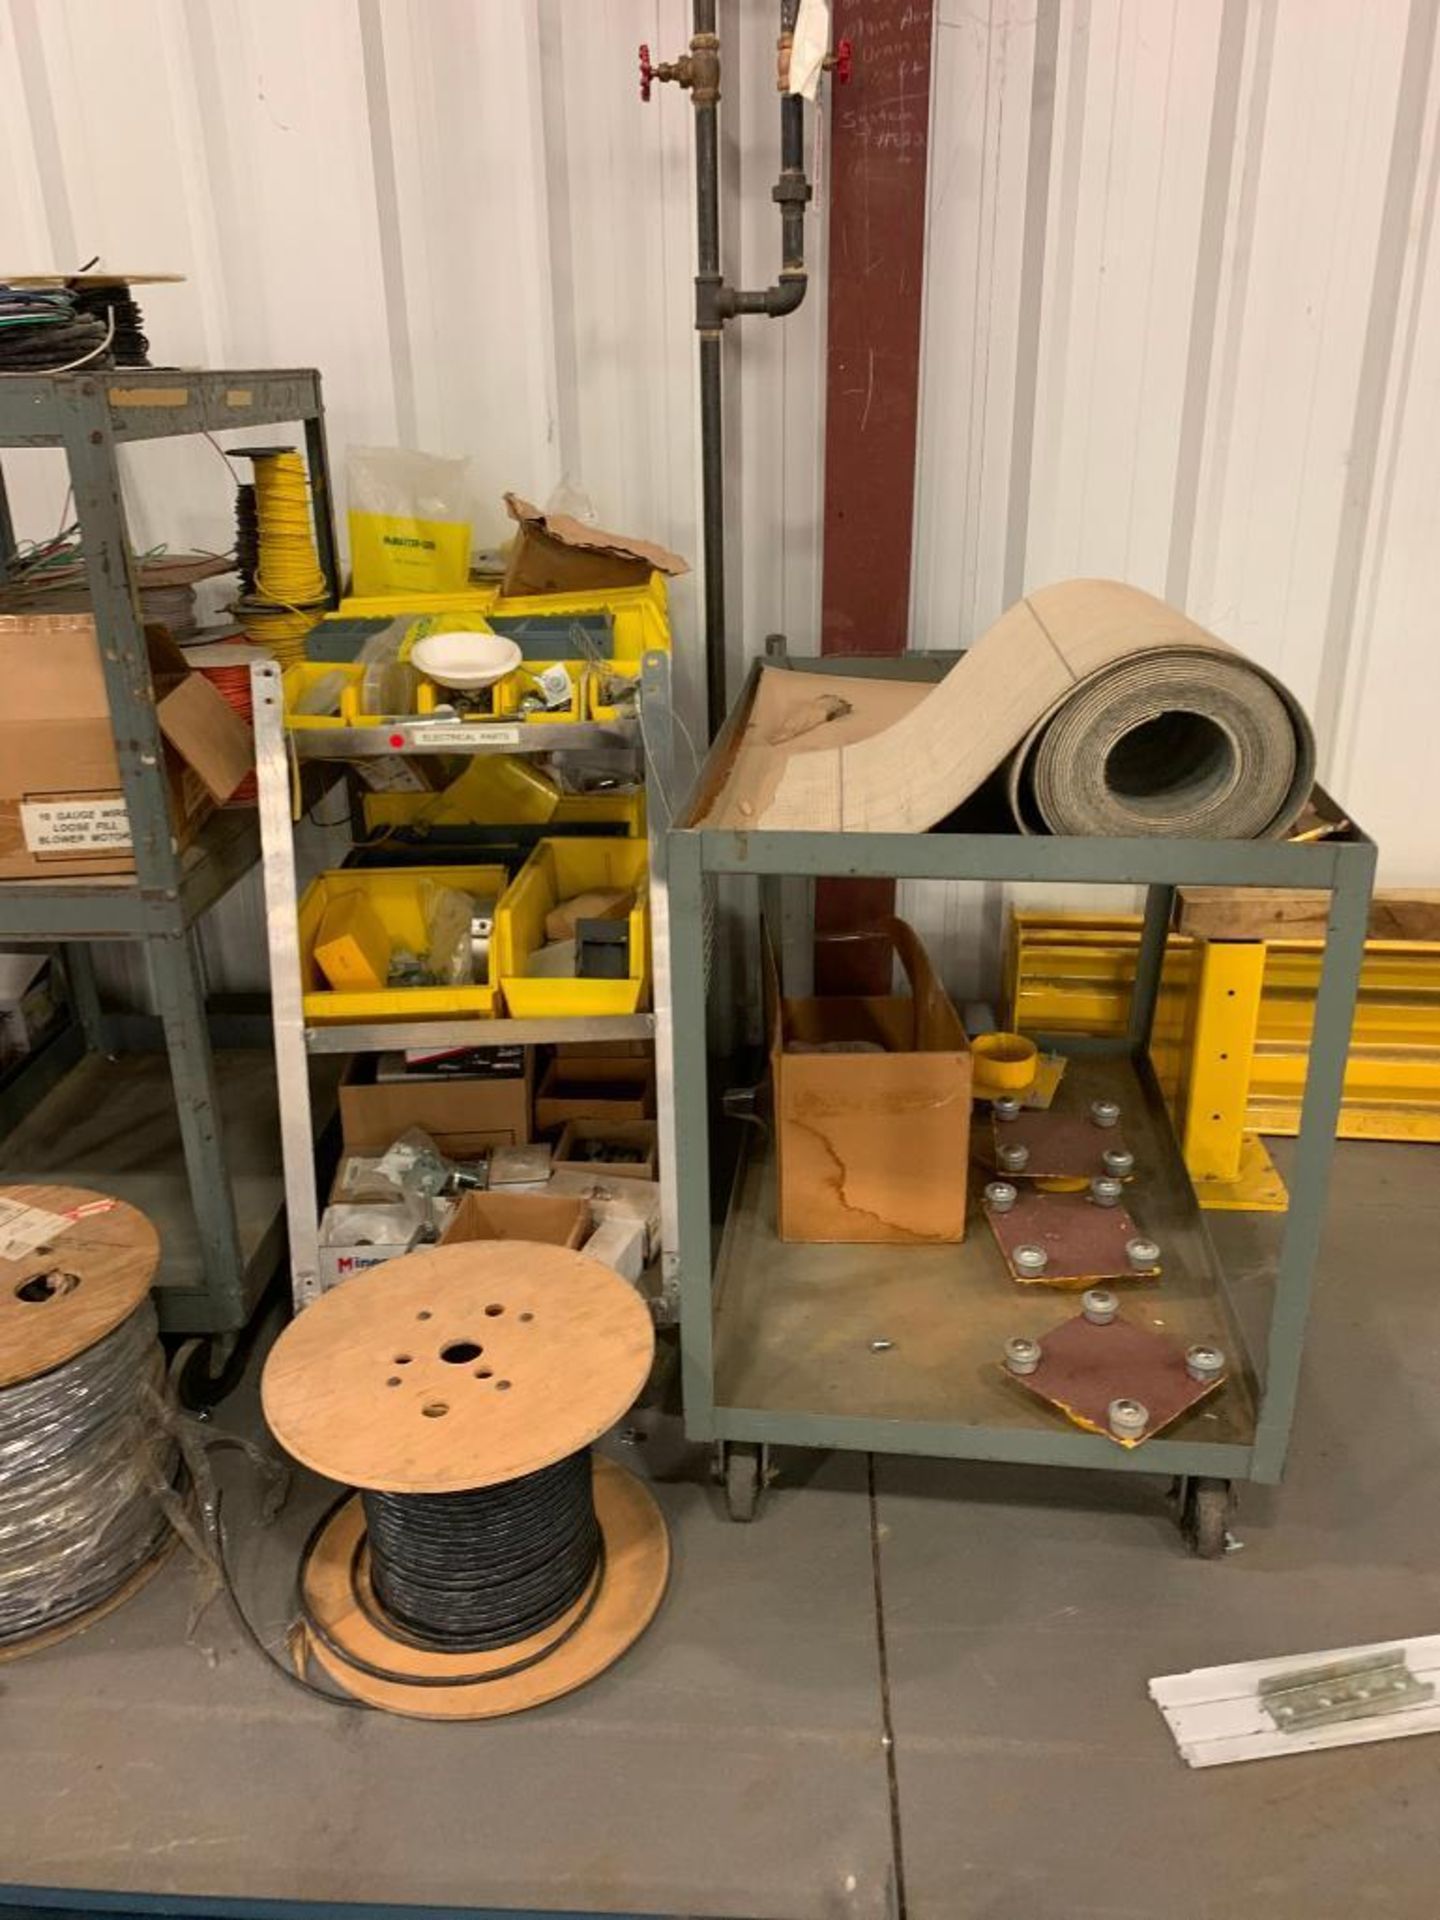 ELECTRICAL SUPPLIES/ PLANT SUPPORT W/ SPOOL CART, OTHER ASSORTED CARTS W/ CONTENT